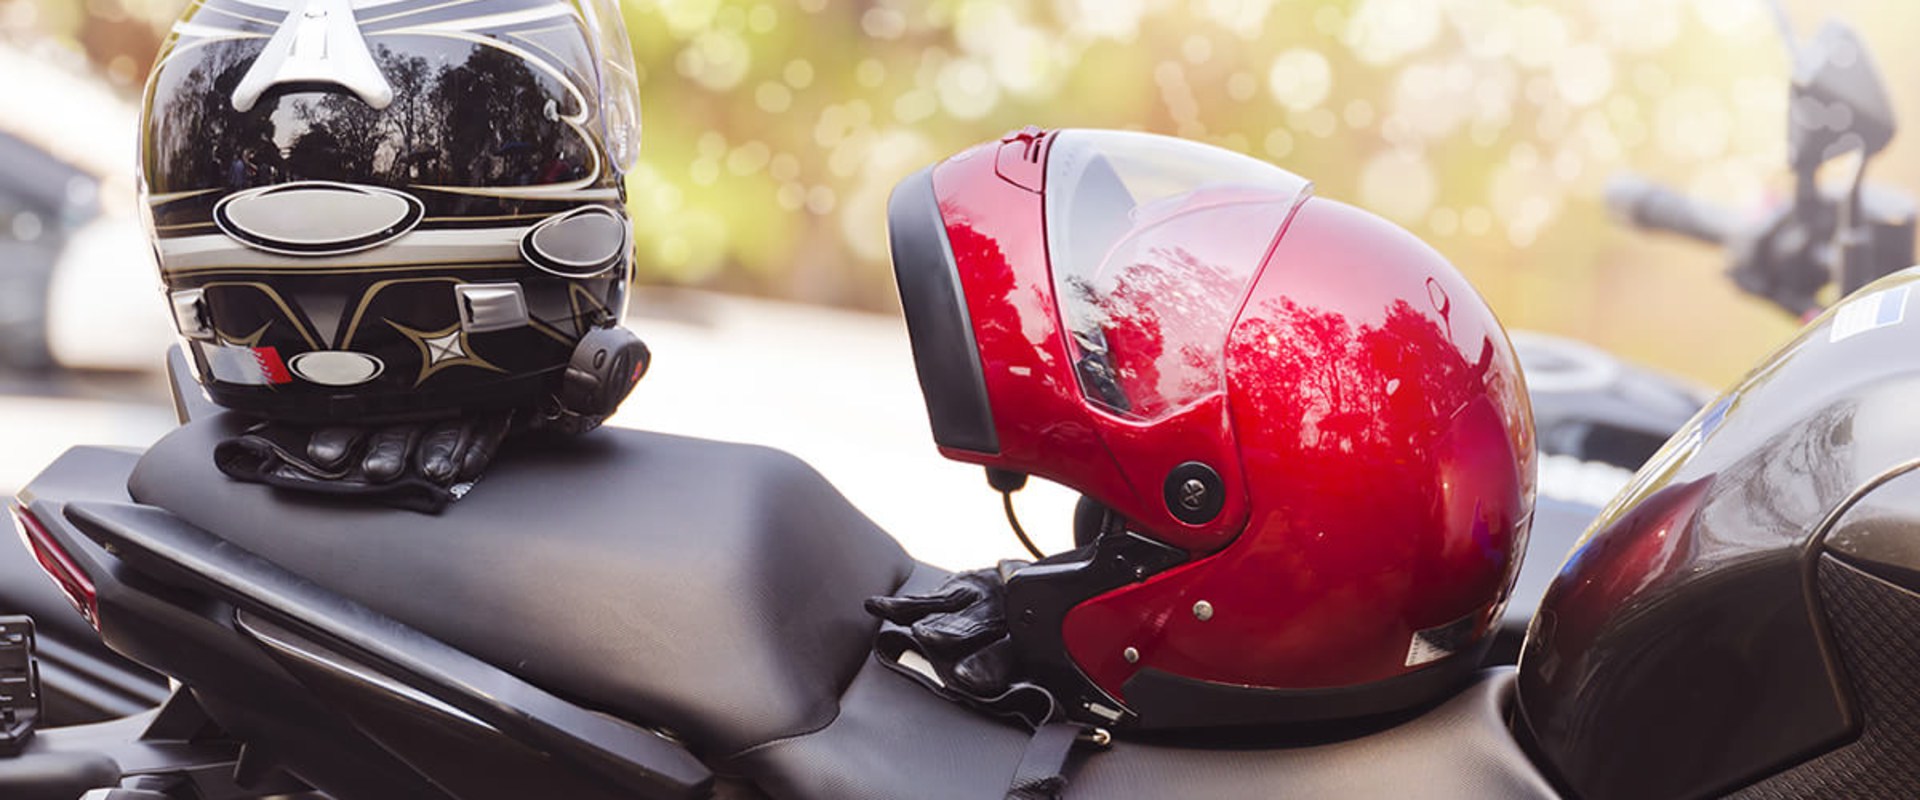 How Much Does Motorcycle Insurance Cost With Foremost?